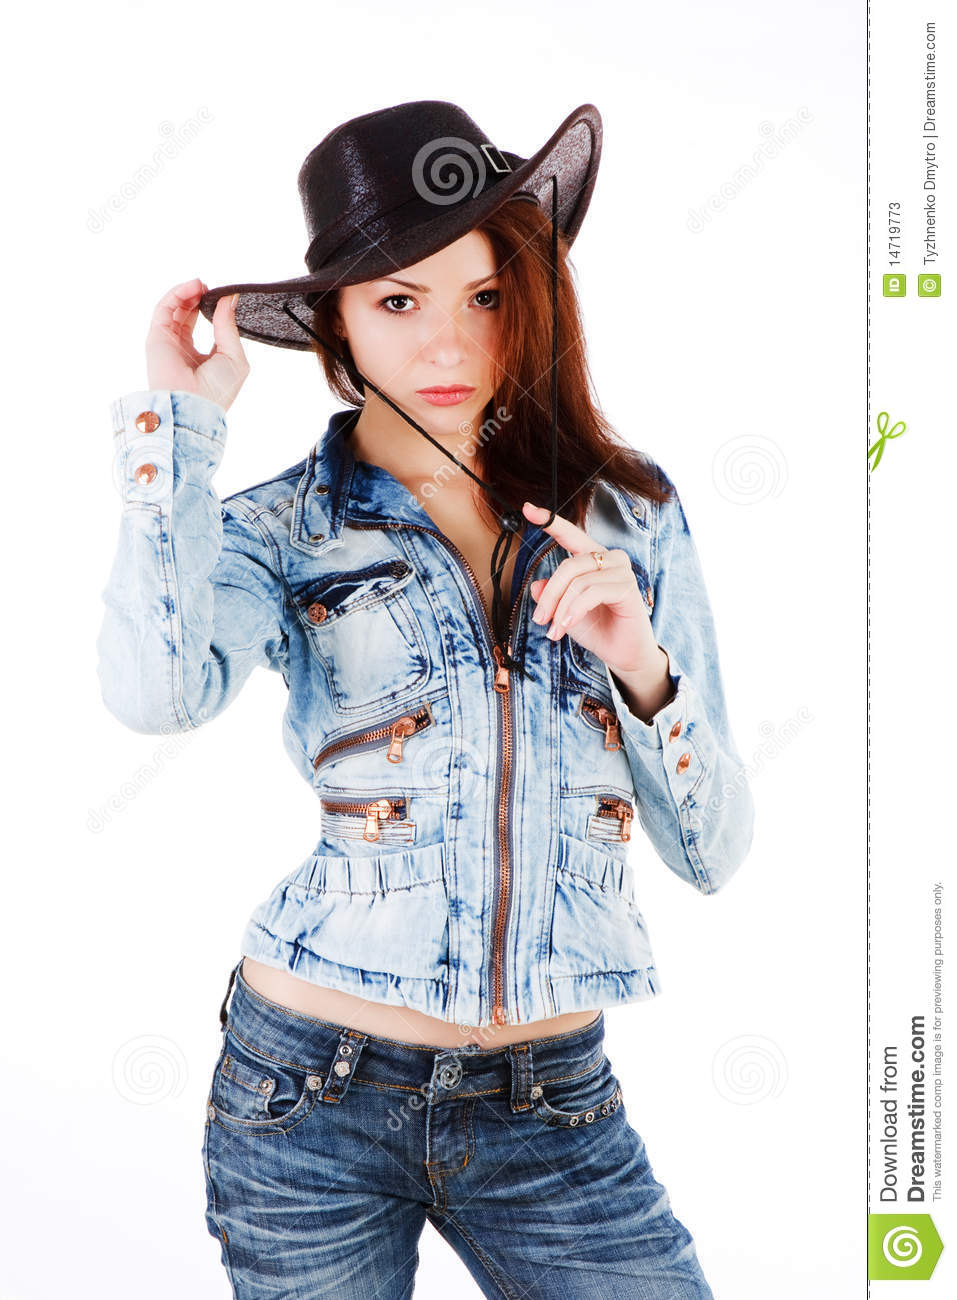 Cowgirl In Denim Jacket Stock Photos   Image  14719773